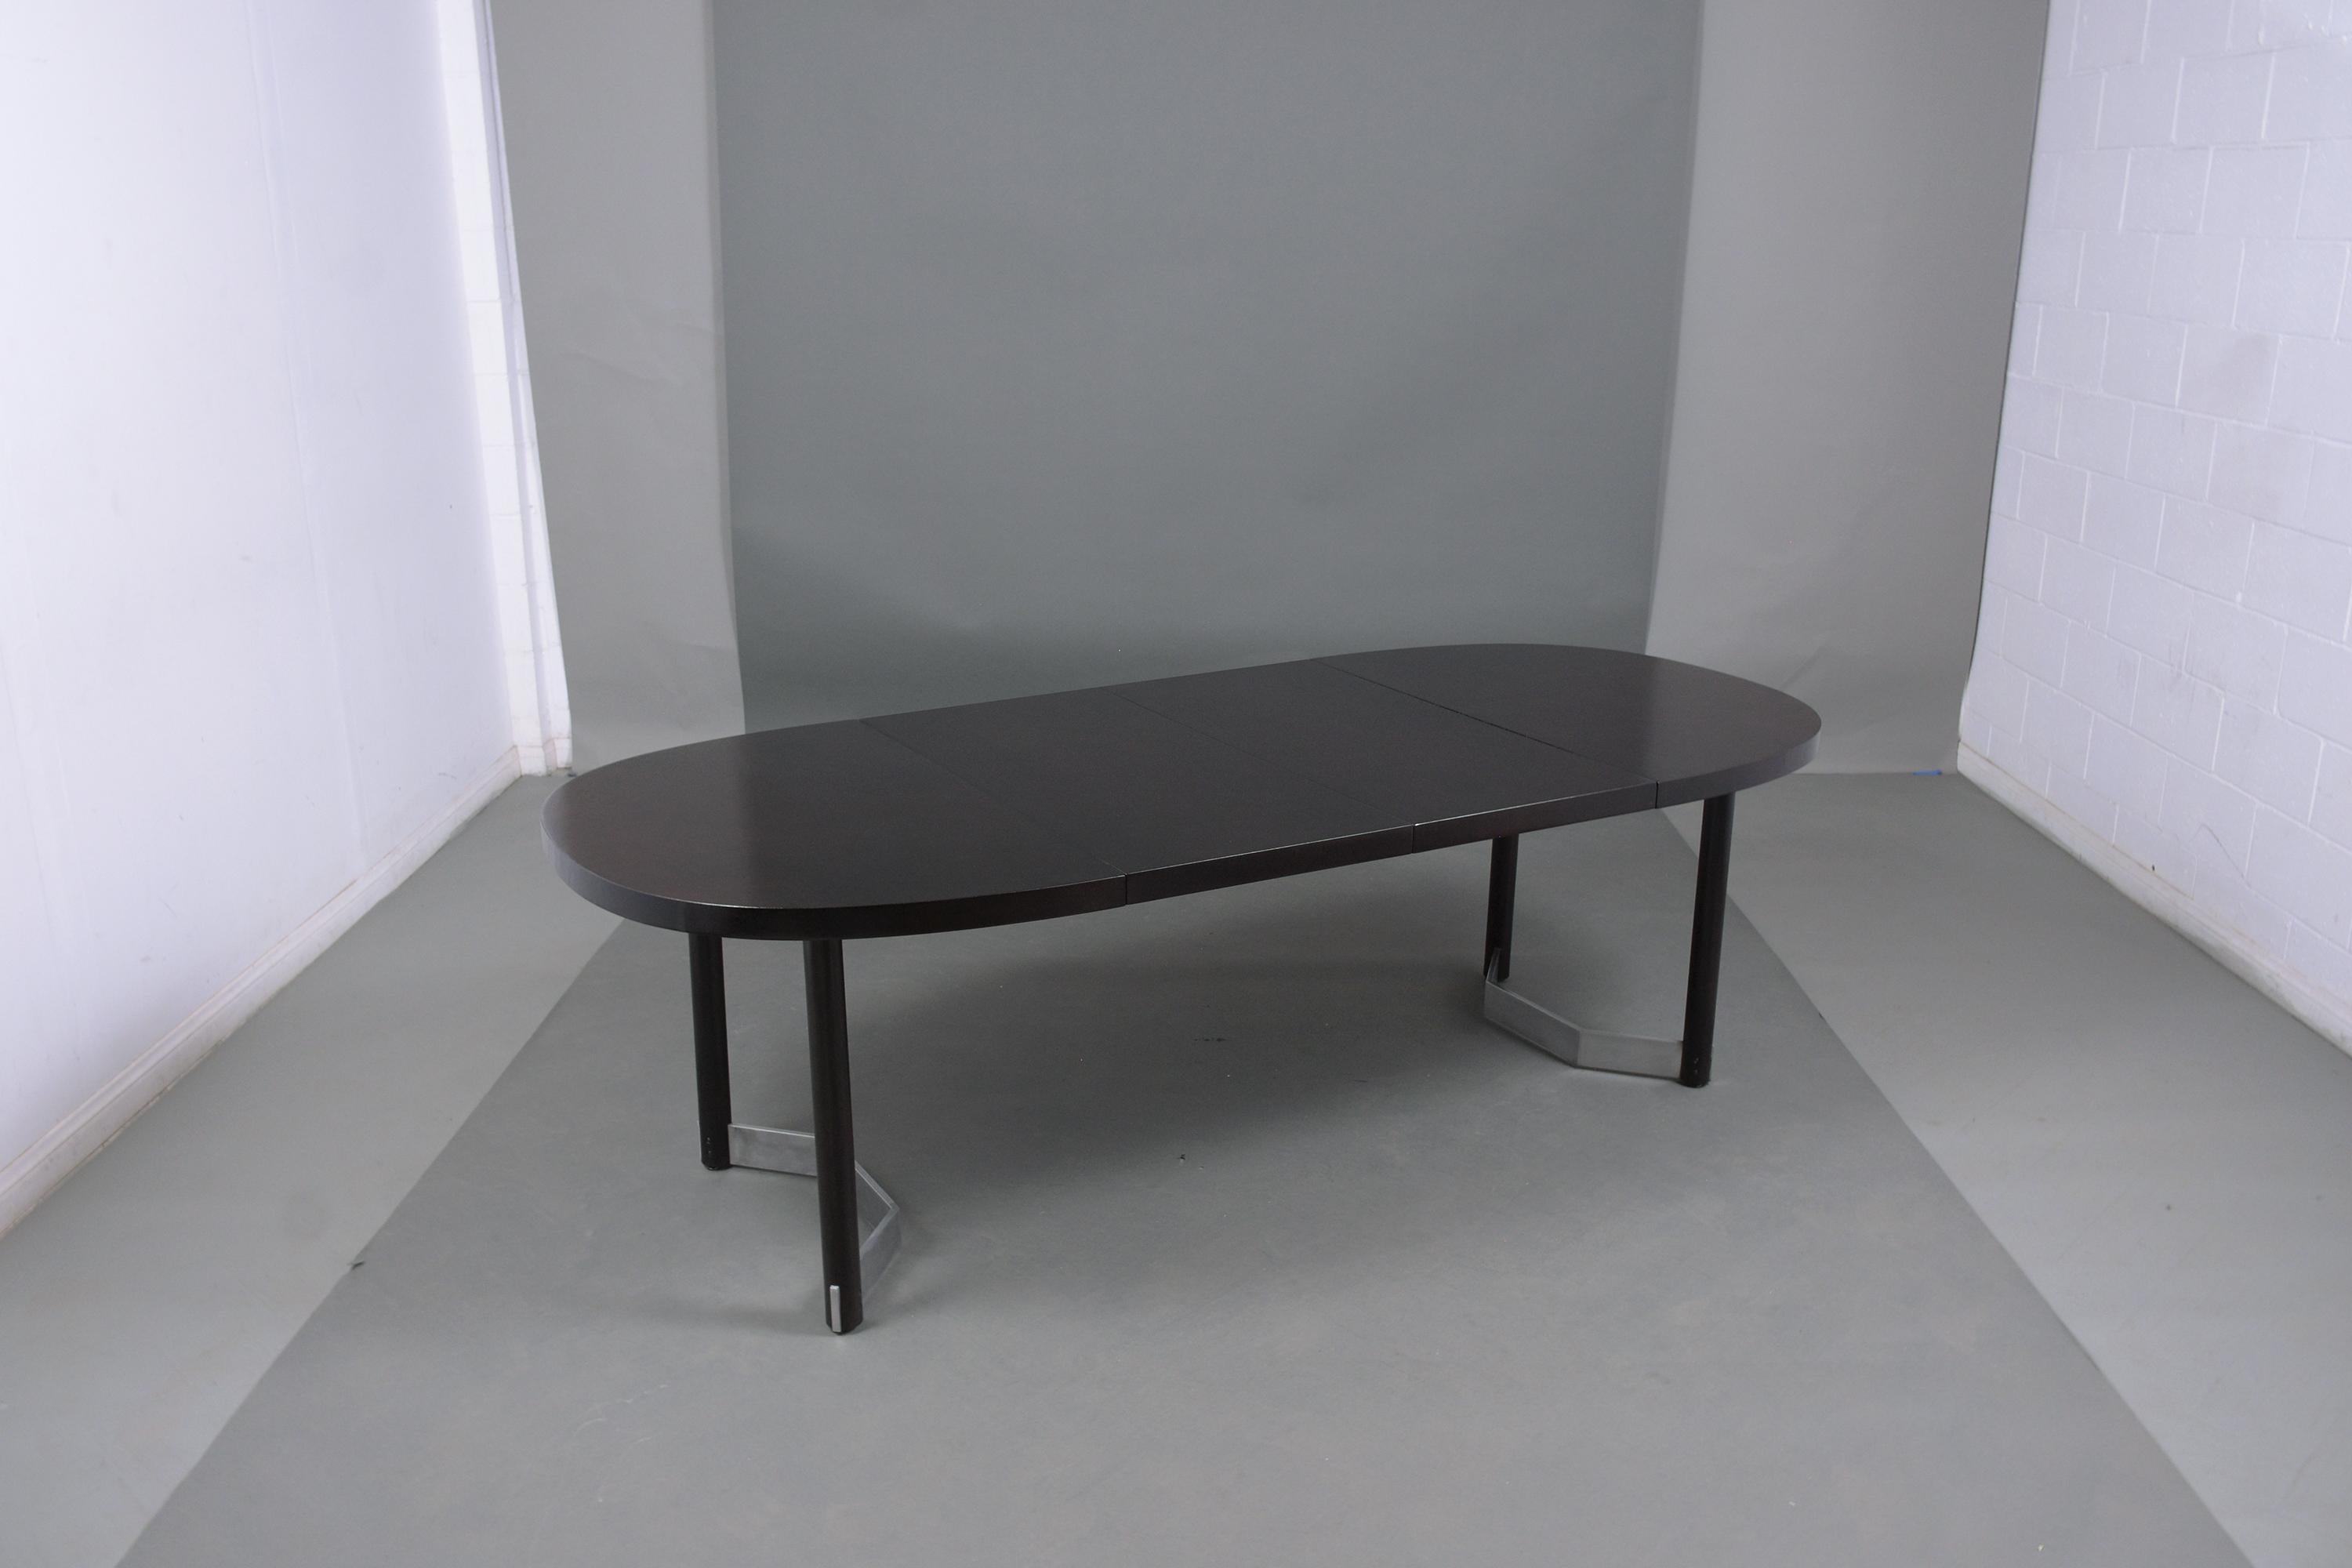 American Vintage 1960's Mid-Century Modern Extendable Dining Table